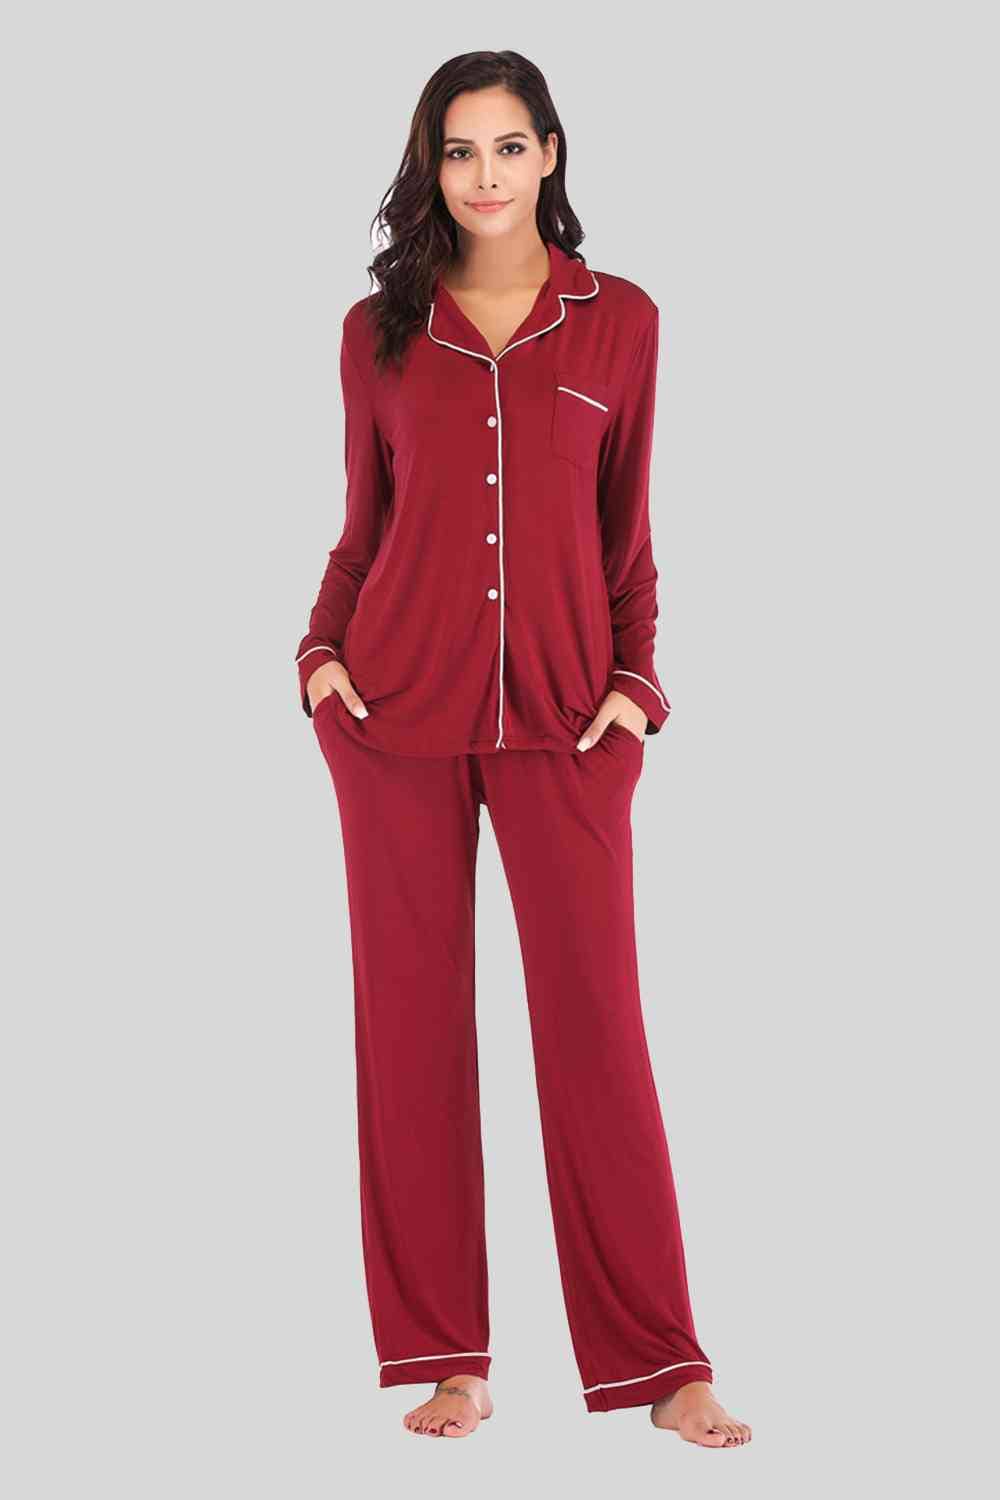 Collared Neck Long Sleeve Loungewear Set with Pockets Wine / S